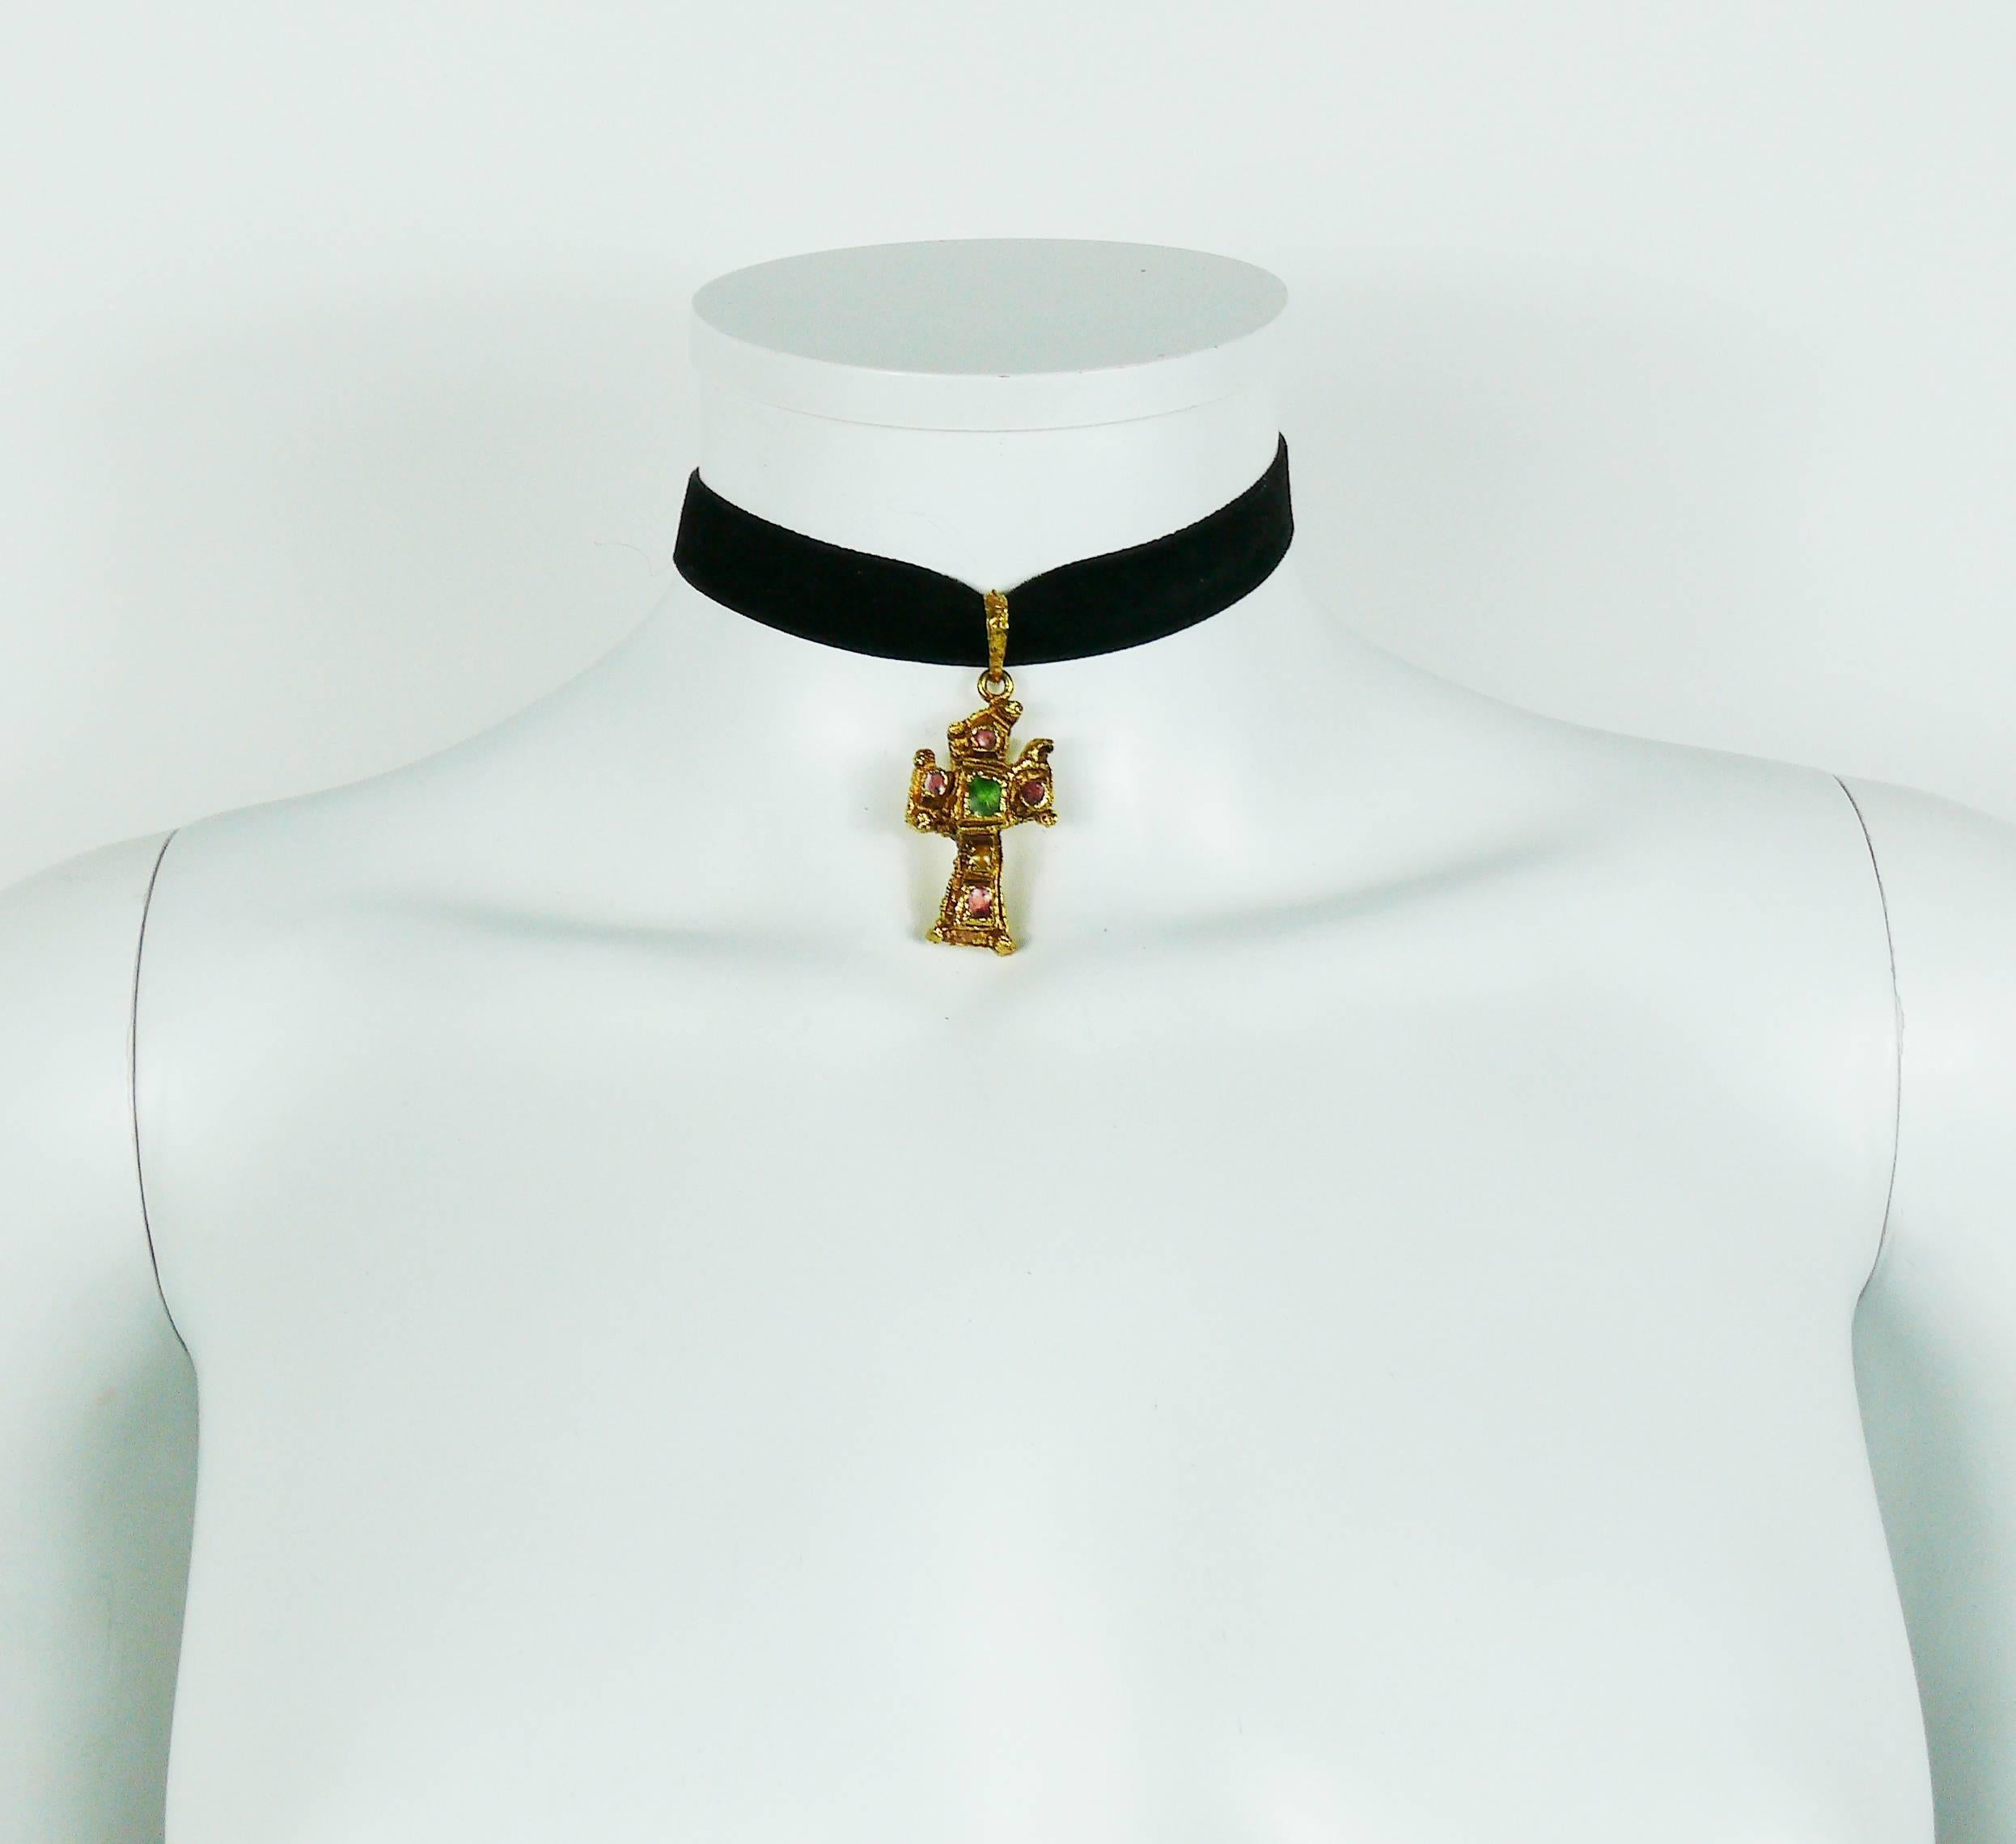 CHRISTIAN LACROIX vintage chocker necklace featuring a textured gold tone cross pendant with antique patina and multicolored enamel.

Black velvet ribbon (ties in the back, adjustable length).

Marked CHRISTIAN LACROIX CL Made in France.

Indicative